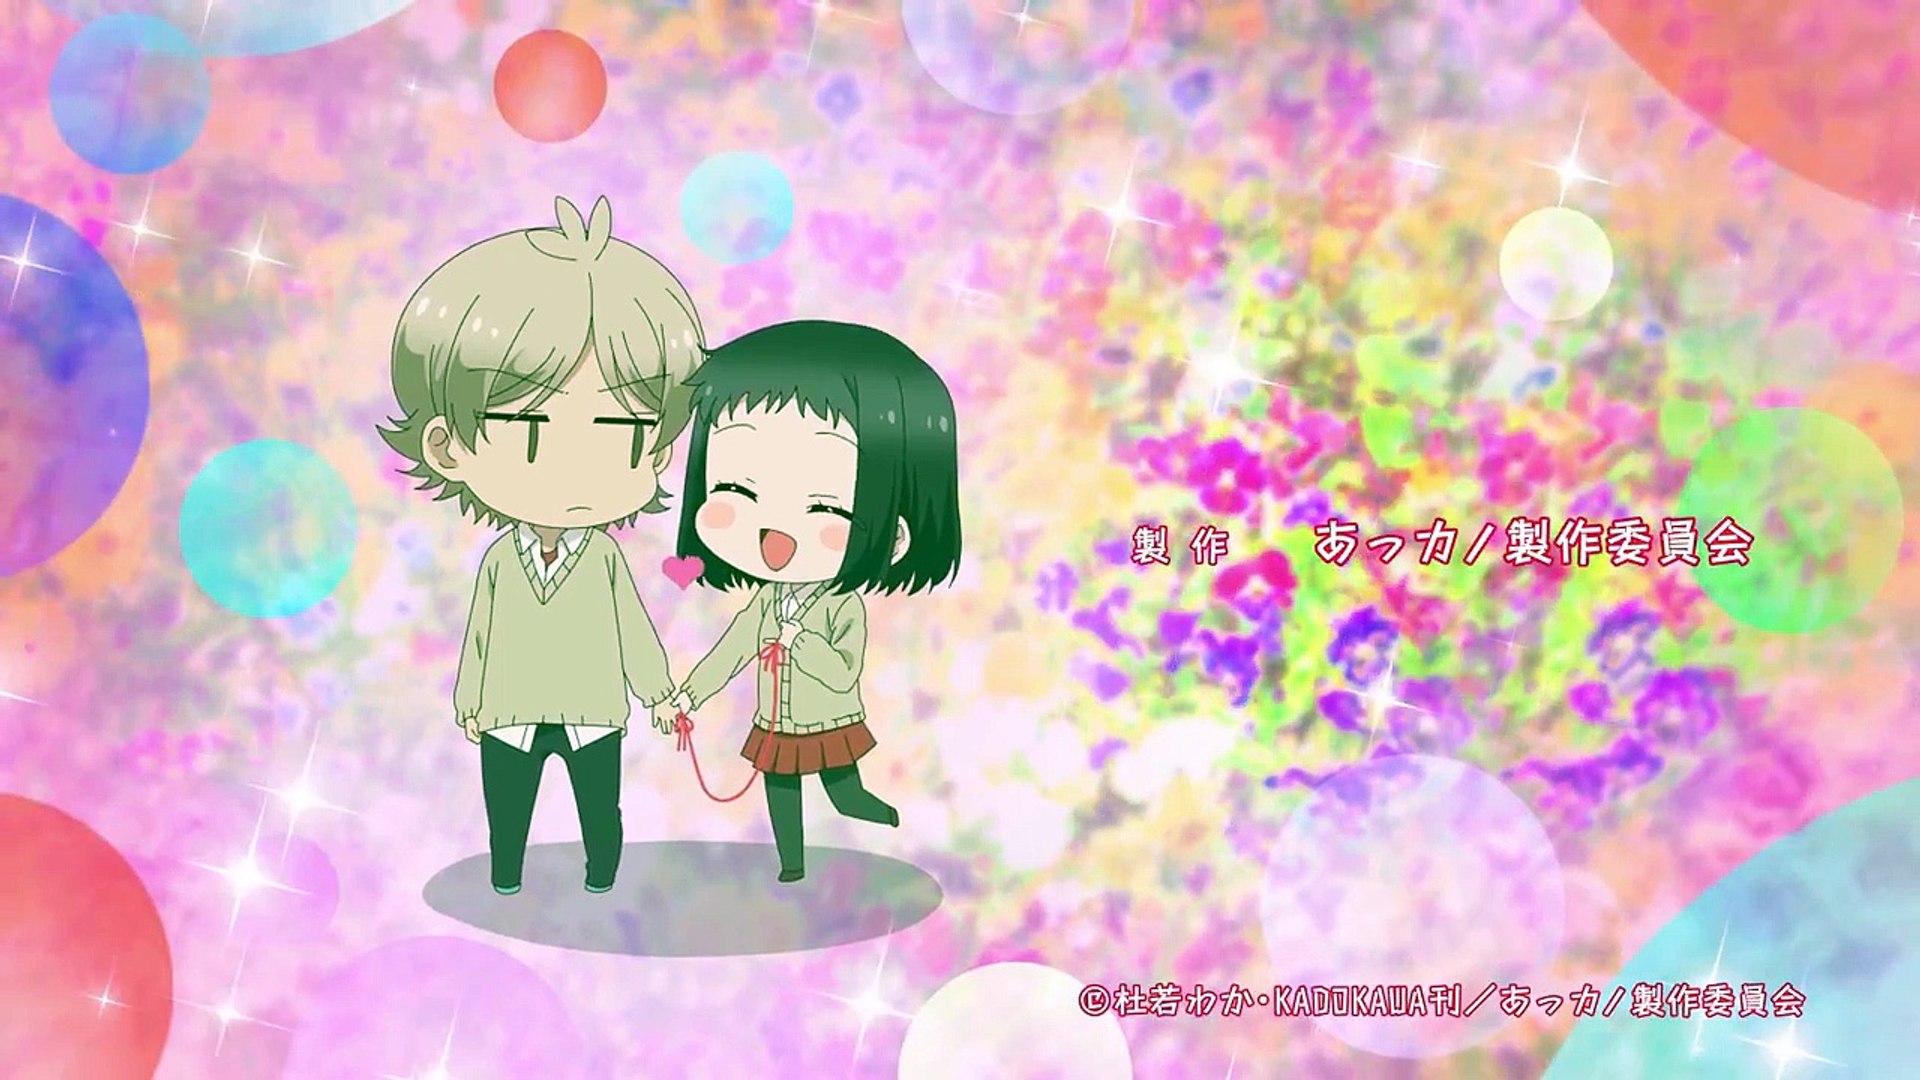 Sys on X: I just finished Akkun to kanojo (My sweet tyrant). It